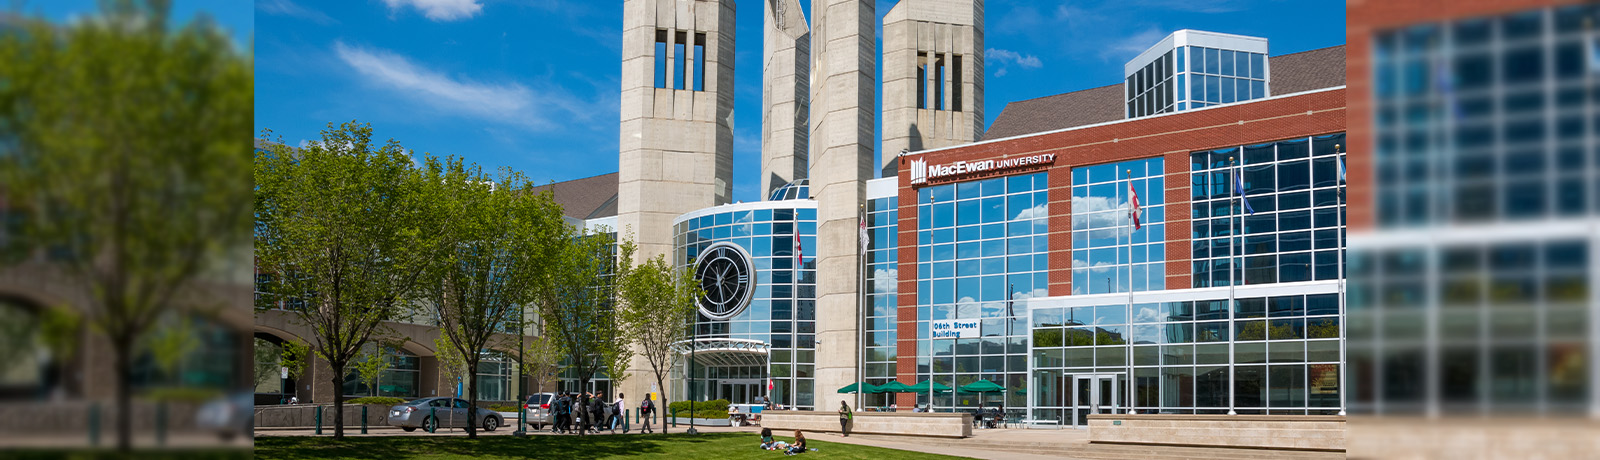 Students sit on the lawn in front of Building 7 as the sun shines on the MacEwan building.